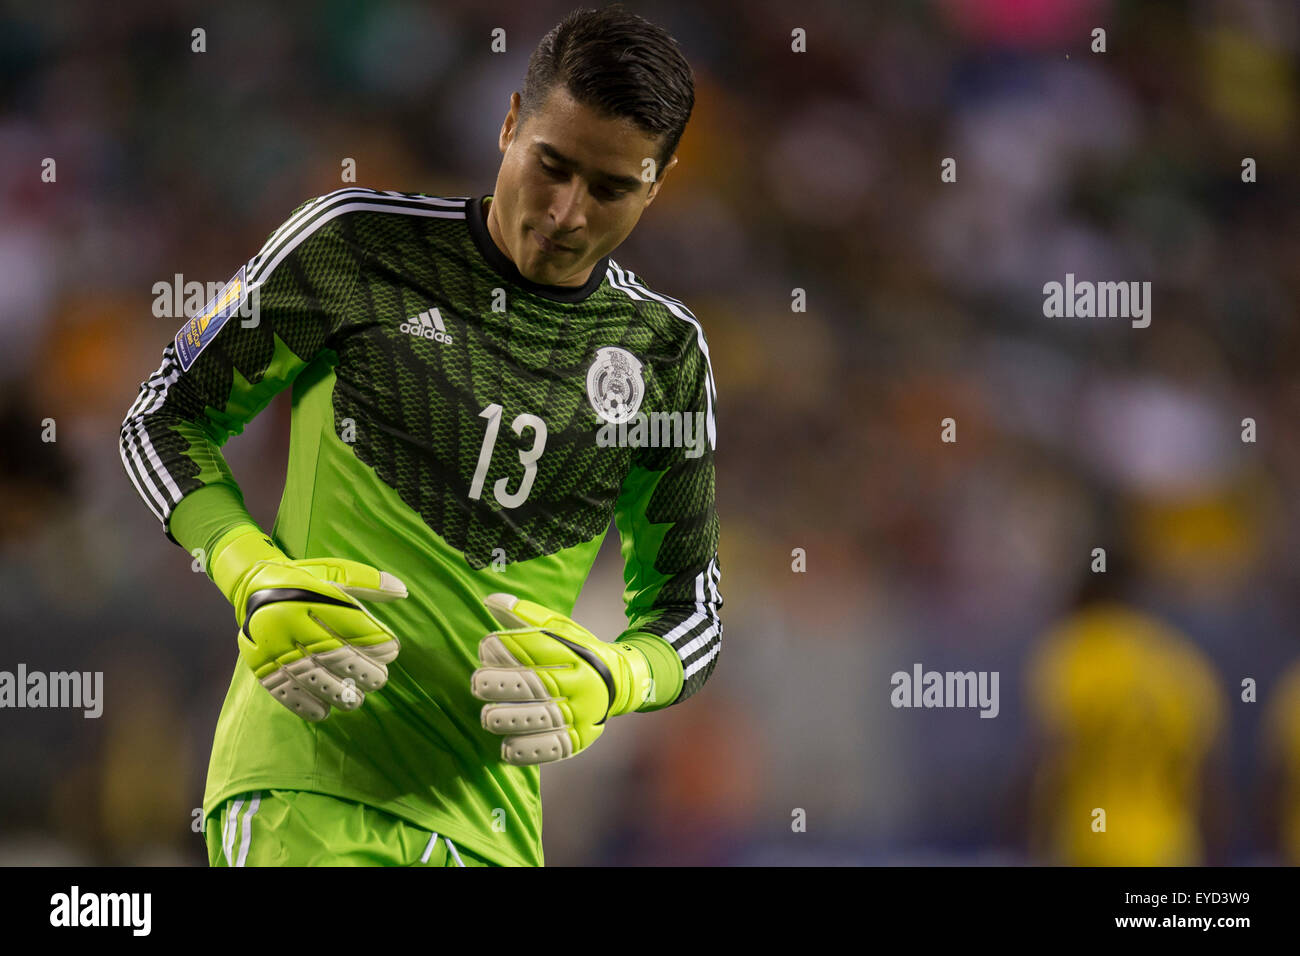 July 26, 2015: Mexico goalkeeper Guillermo Ochoa (13) in action during the CONCACAF Gold Cup 2015 Final match between Jamaica and Mexico at Lincoln Financial Field in Philadelphia, Pennsylvania. Mexico won 3-1. Christopher Szagola/CSM Stock Photo